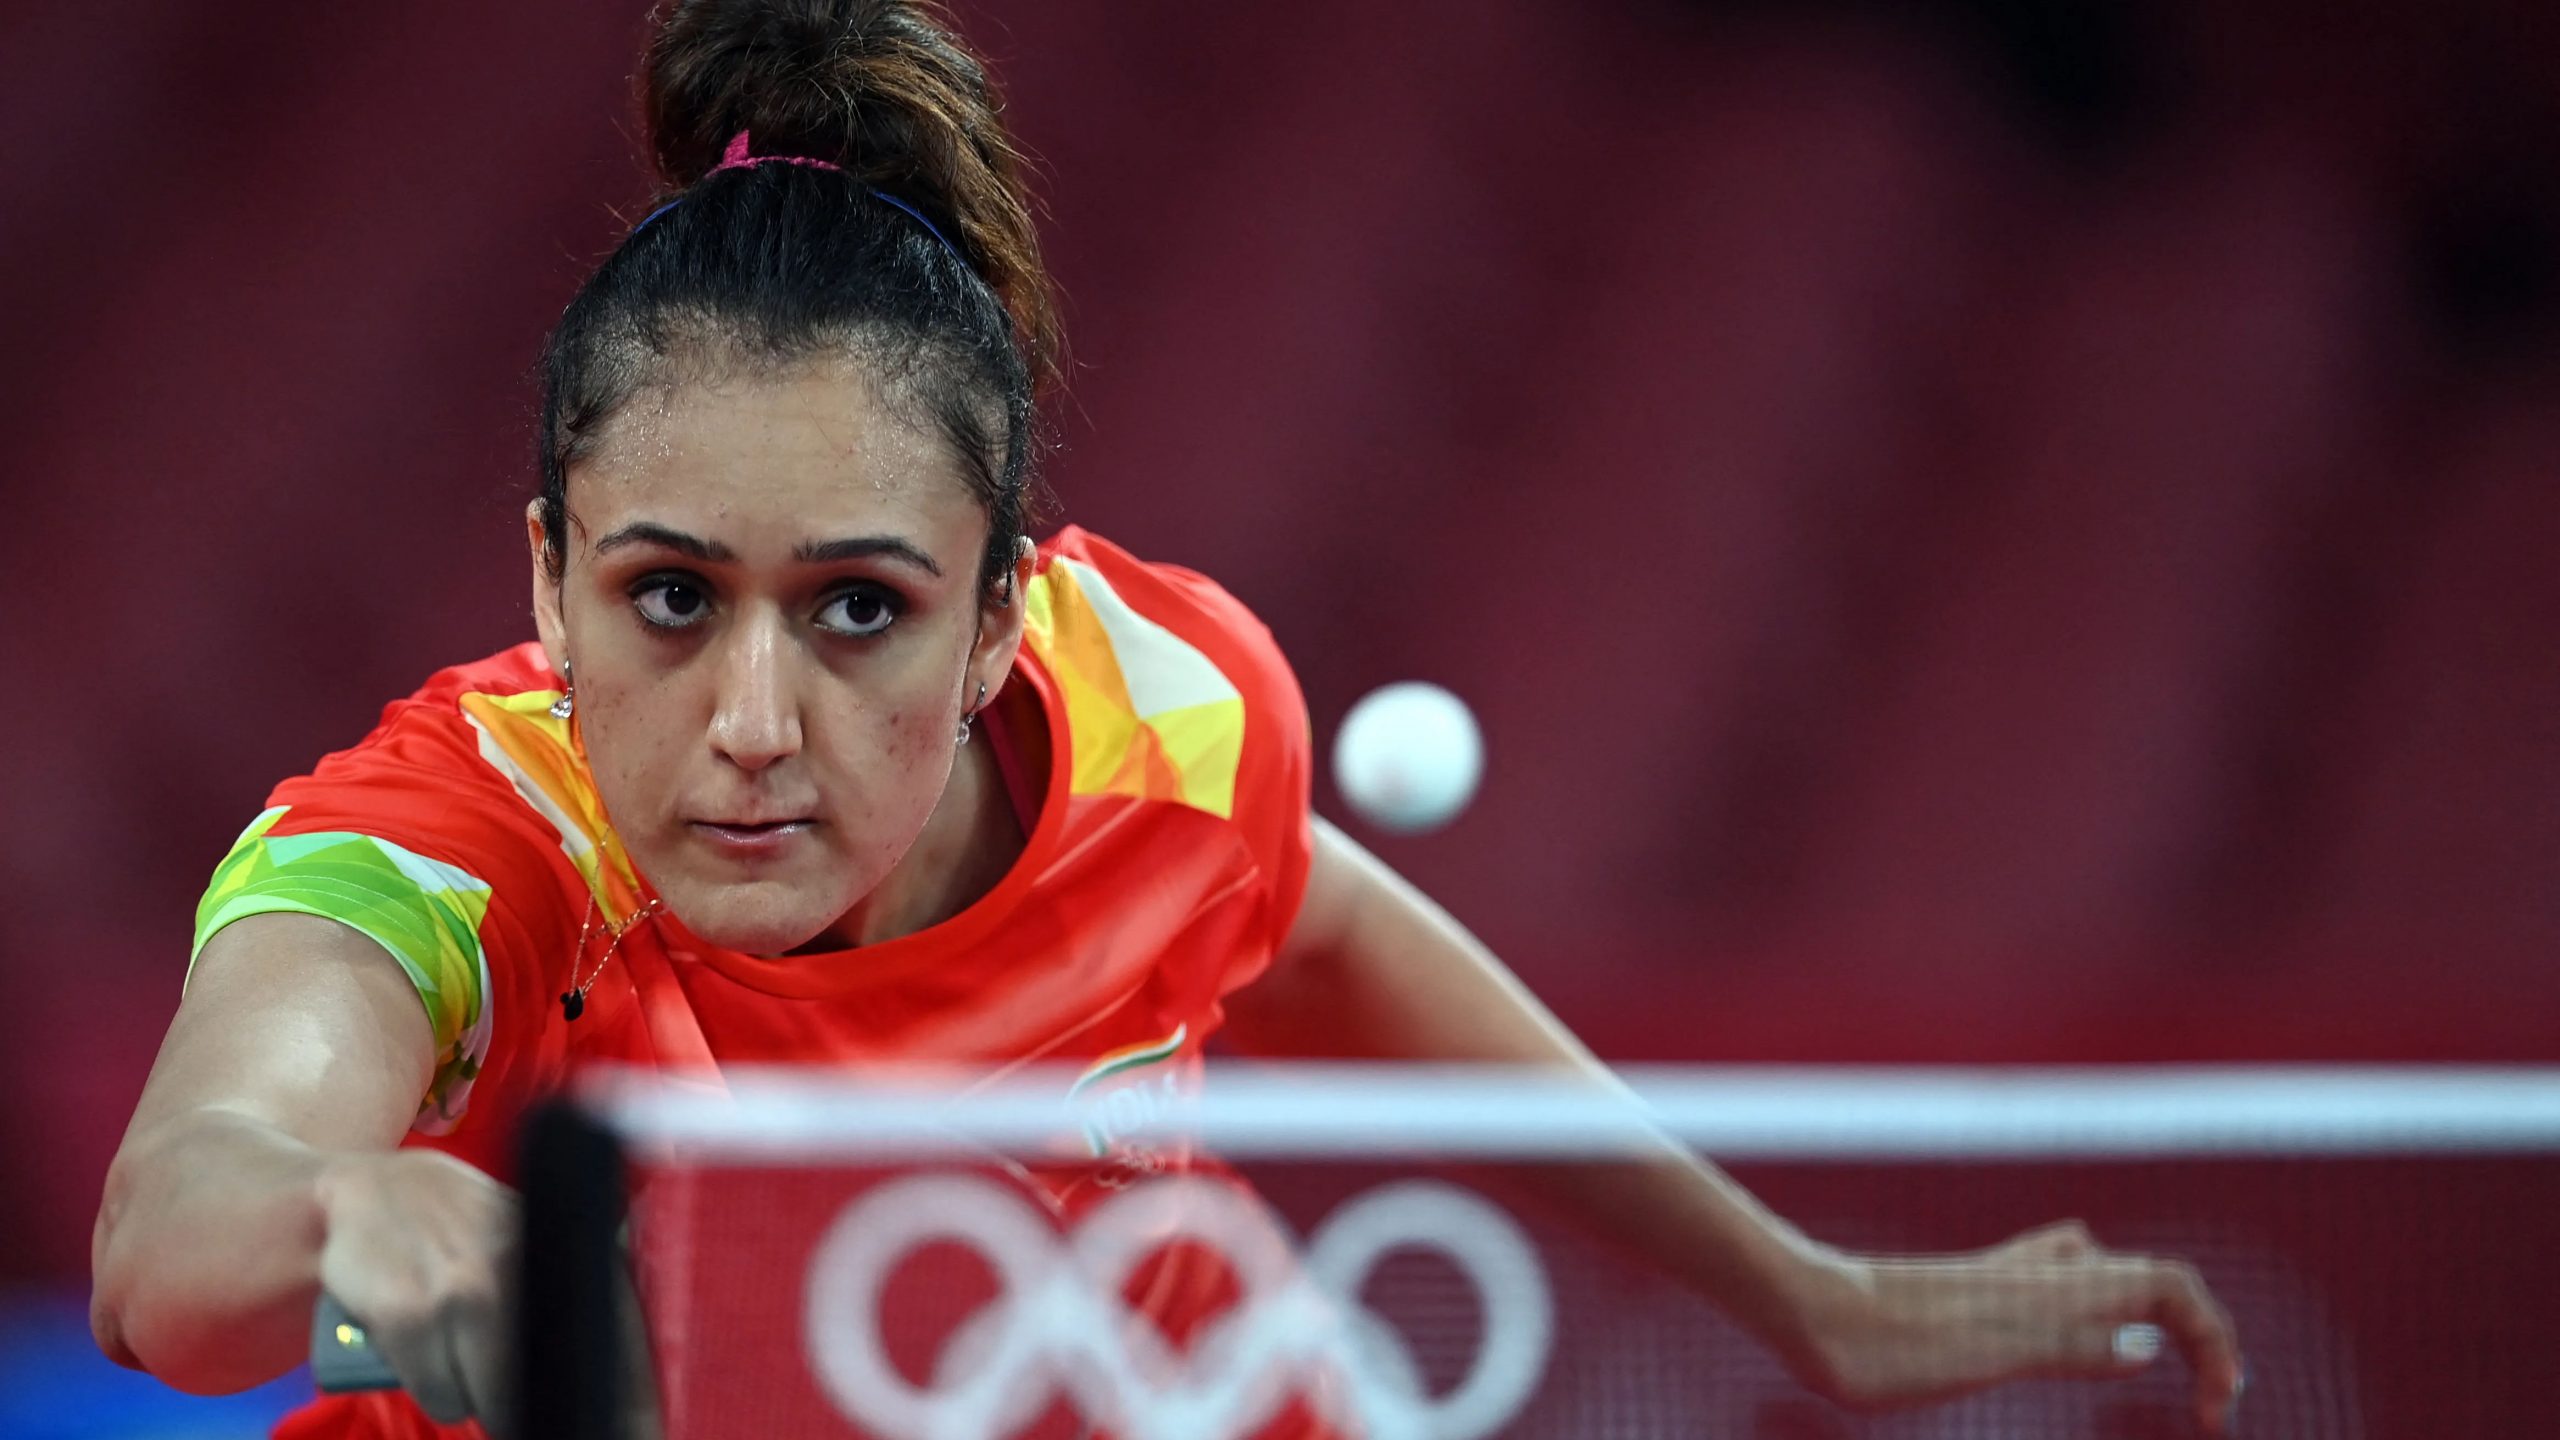 Tokyo Olympics: Manika Batra ousted after 3rd round loss in table tennis